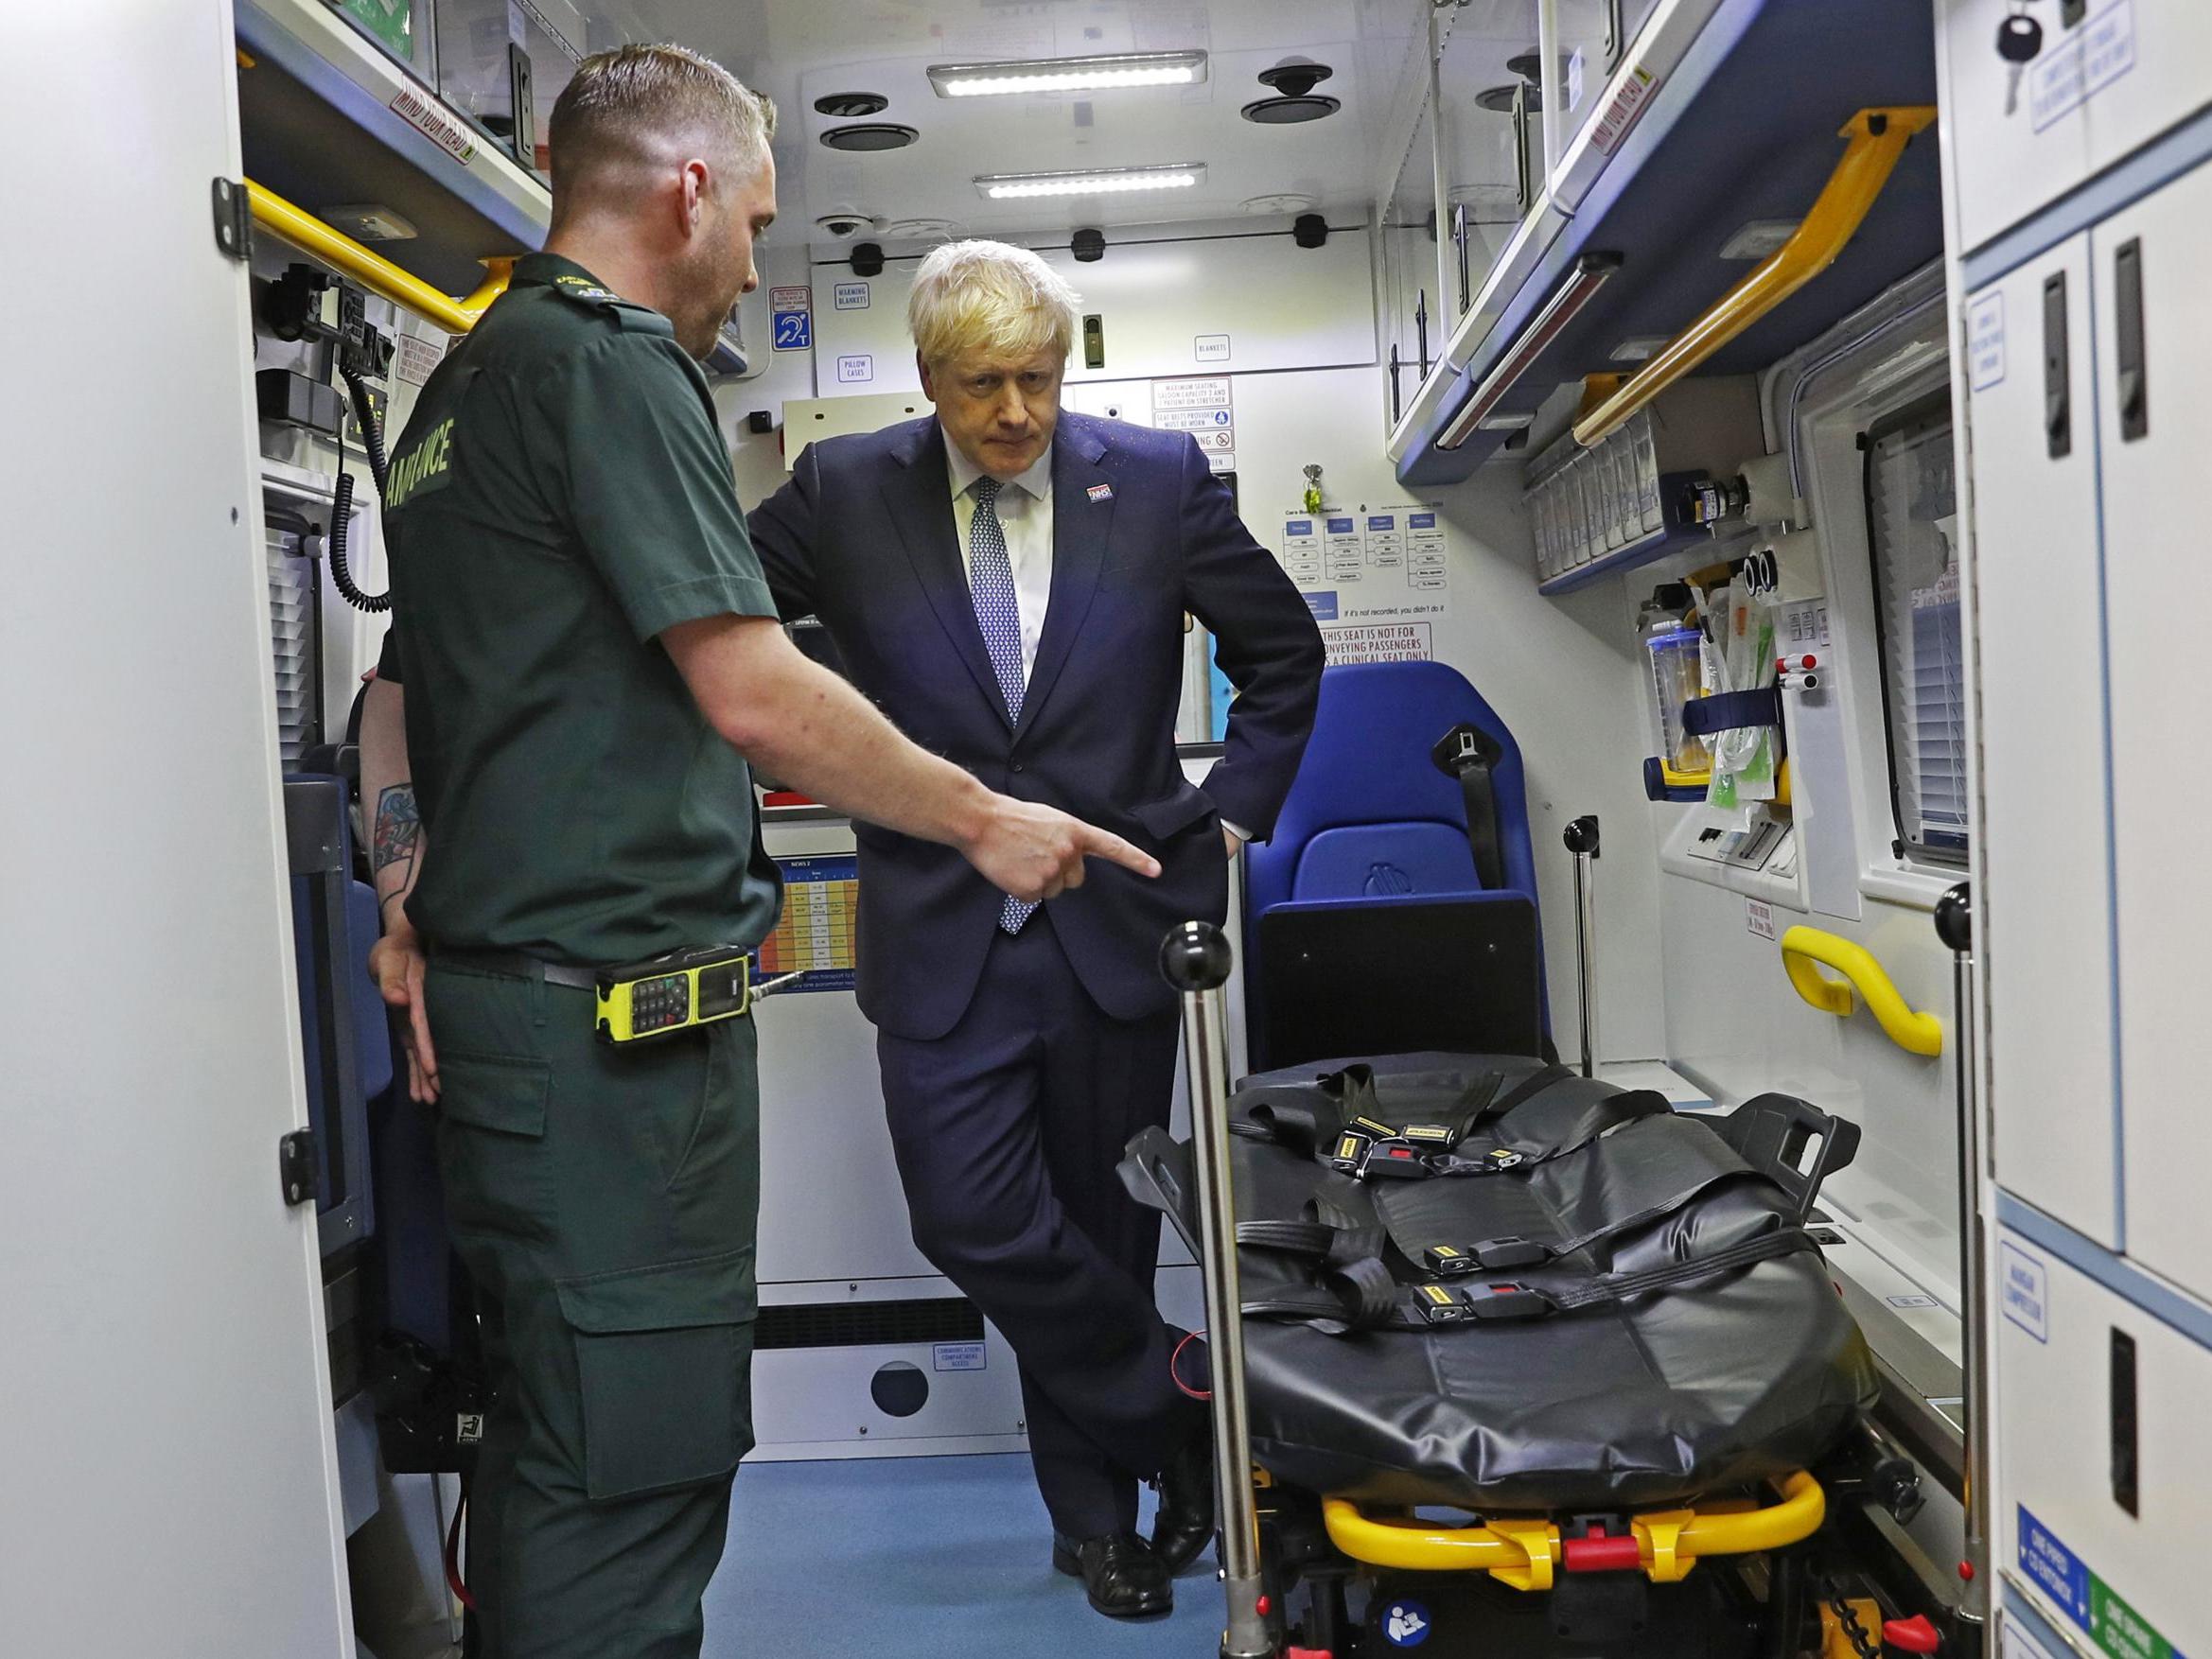 In some parts of the south, almost one in five emergency calls result in a private ambulance being dispatched